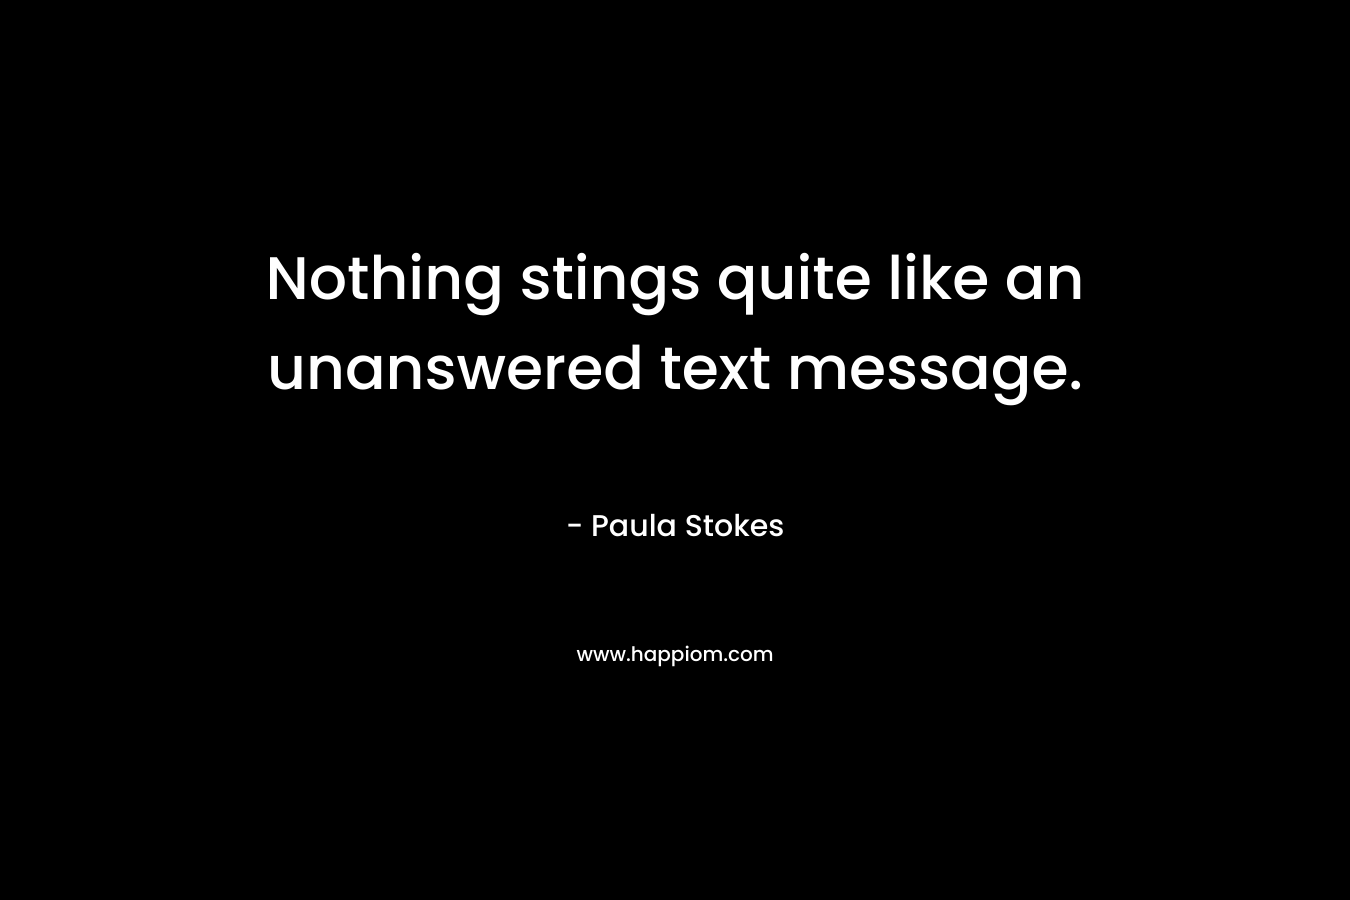 Nothing stings quite like an unanswered text message.